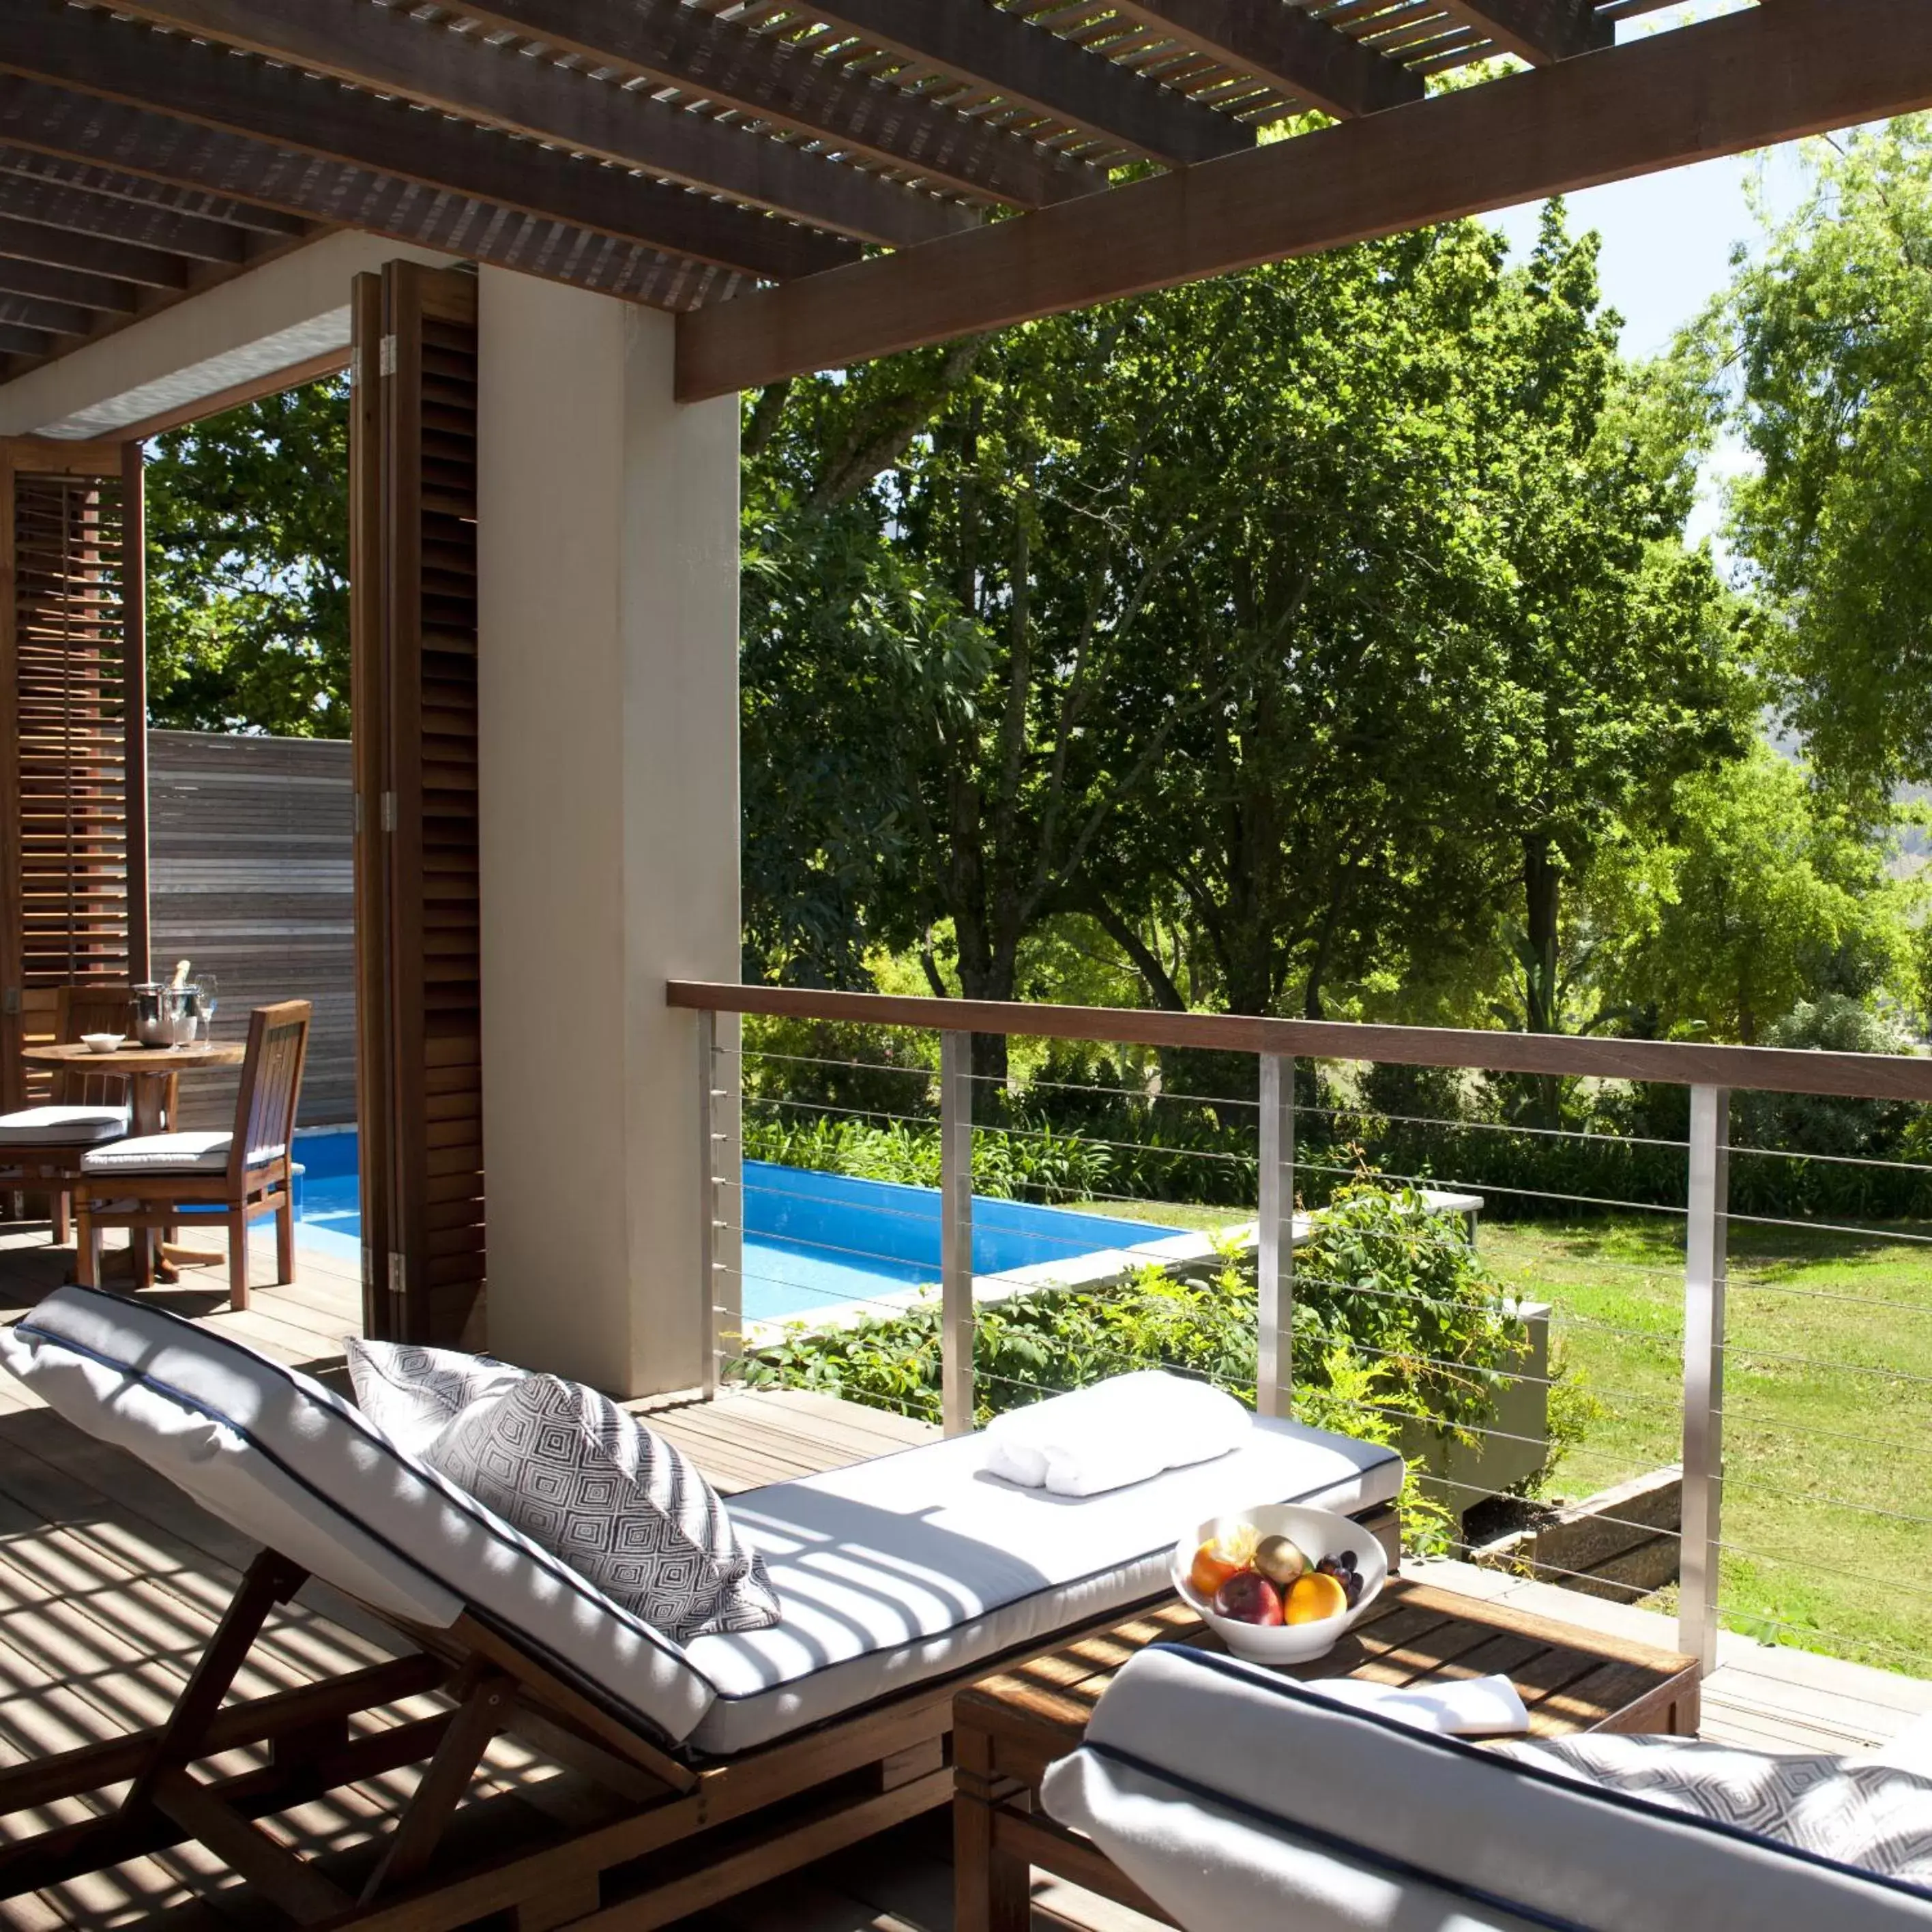 Patio, Pool View in Delaire Graff Lodges and Spa